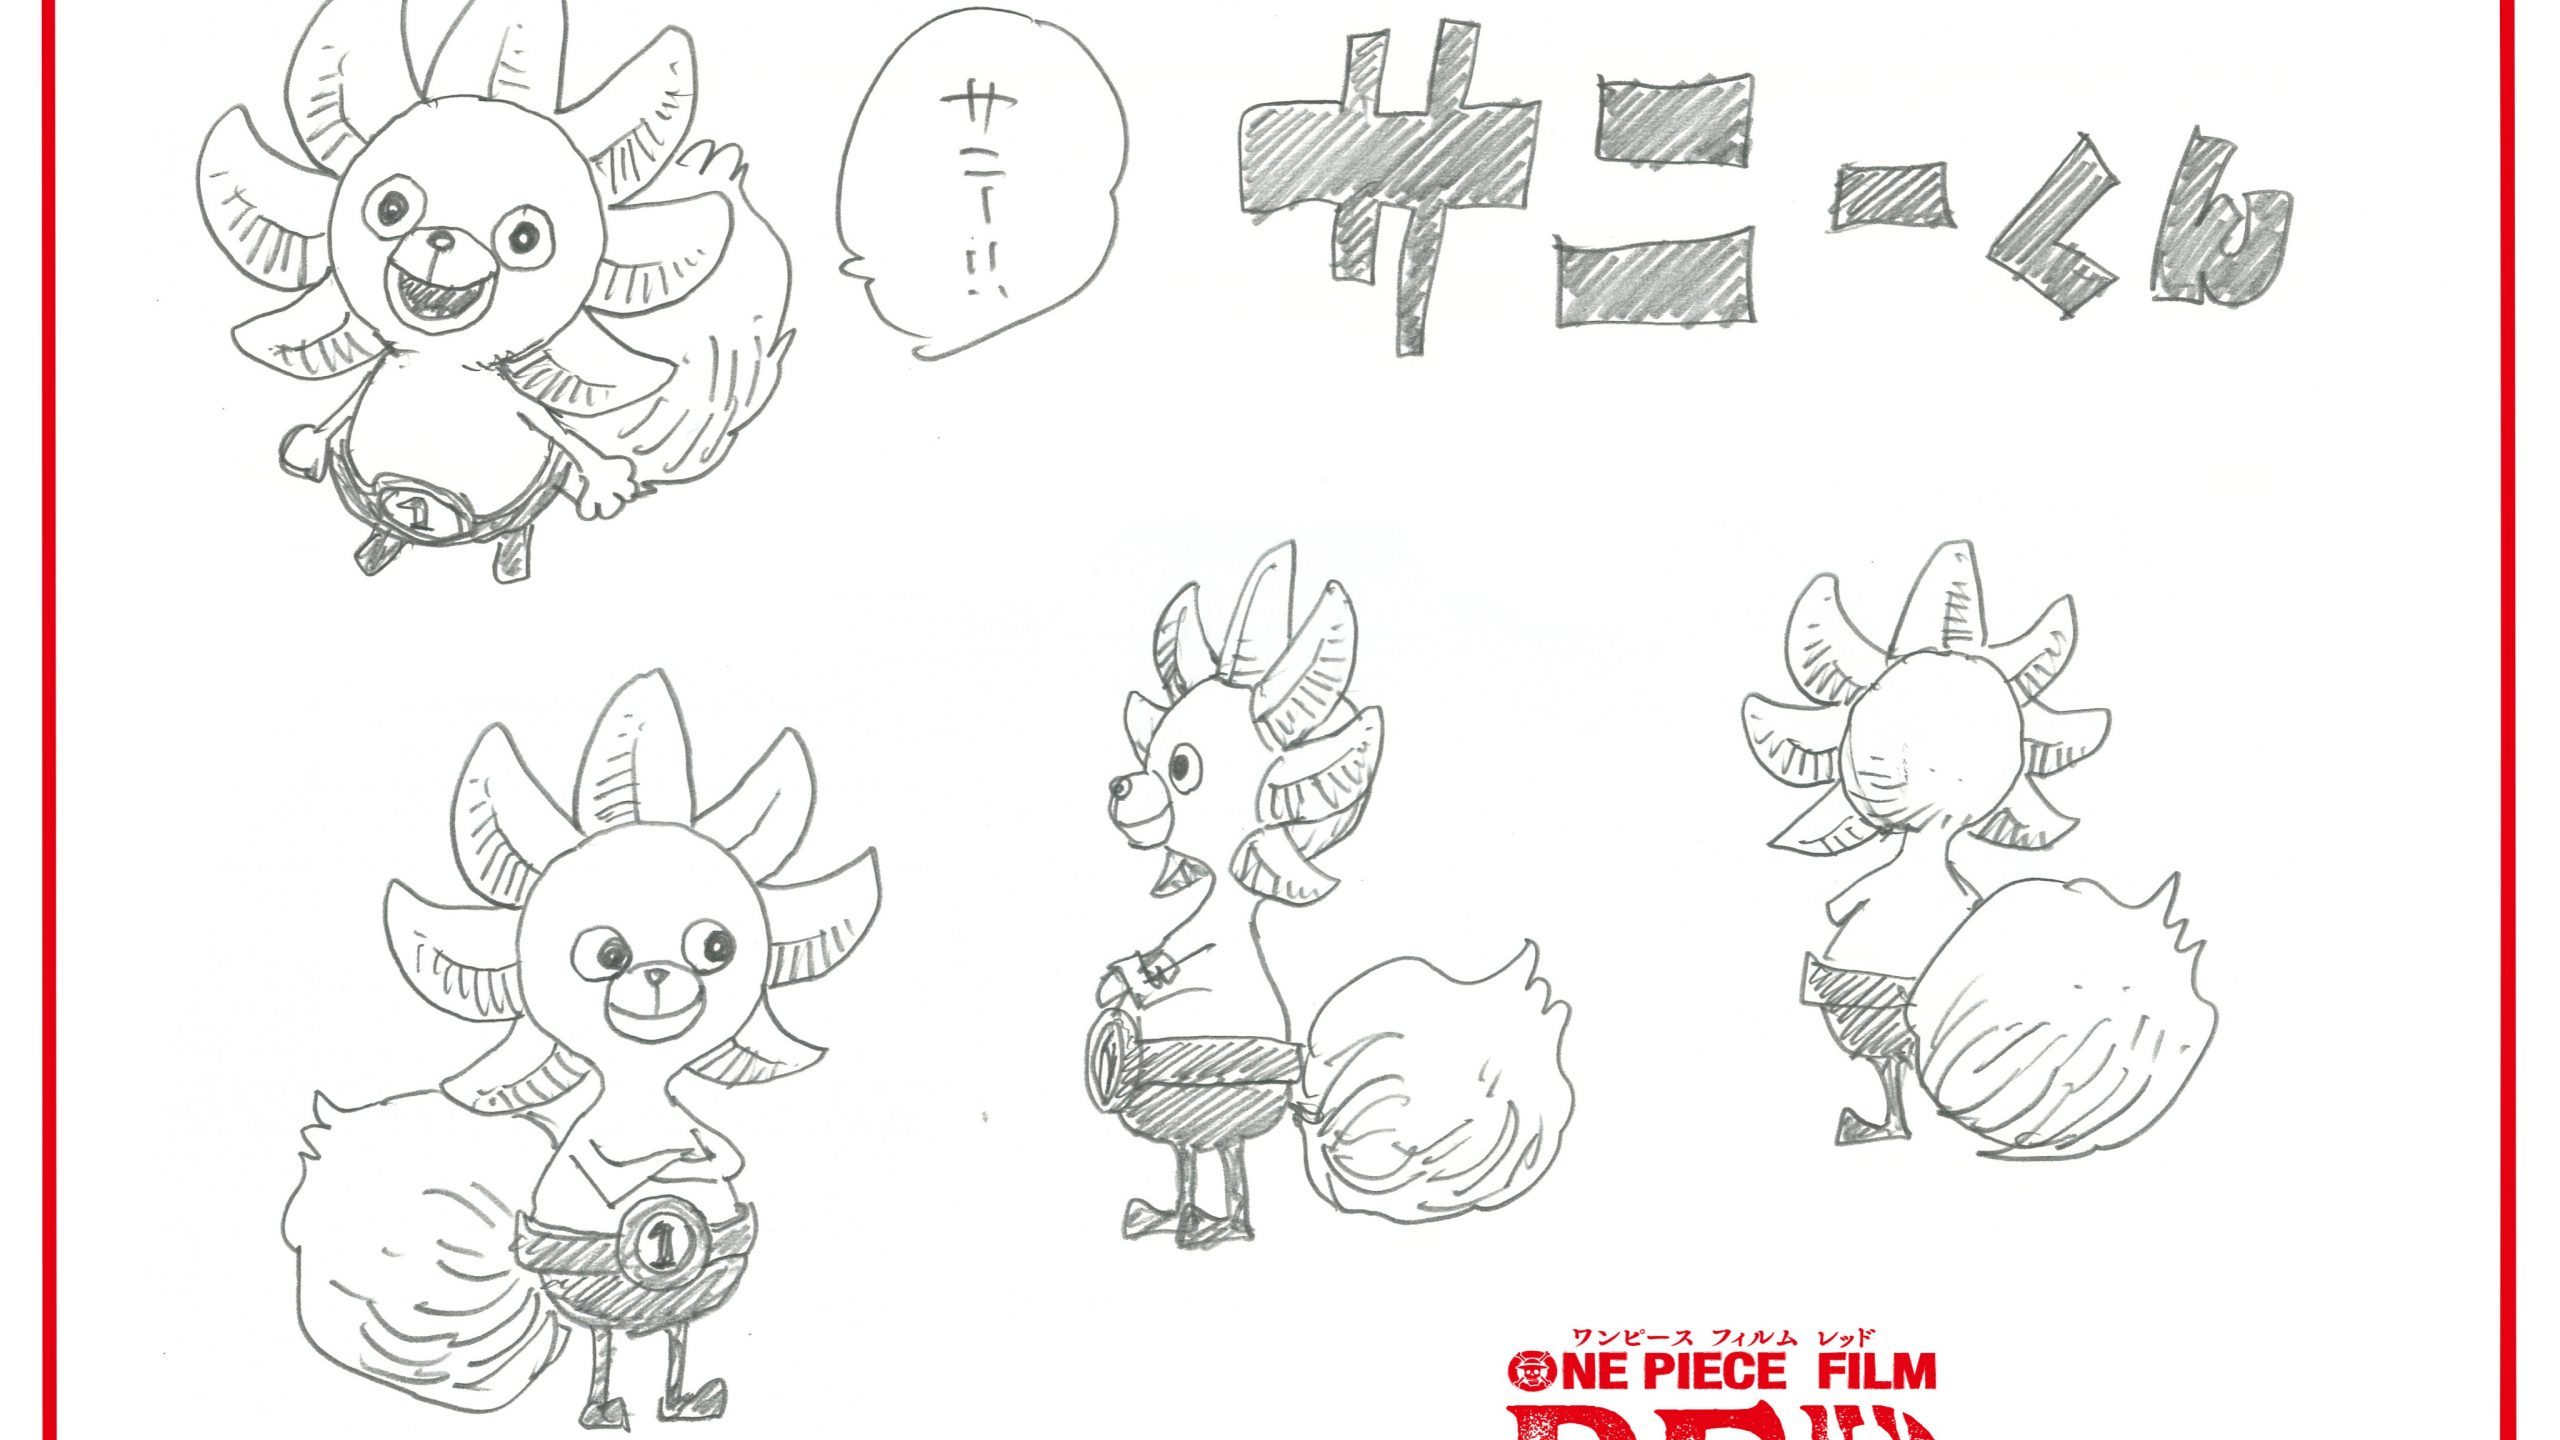 One Piece Film Red Reveals Sunny Kun Character Design